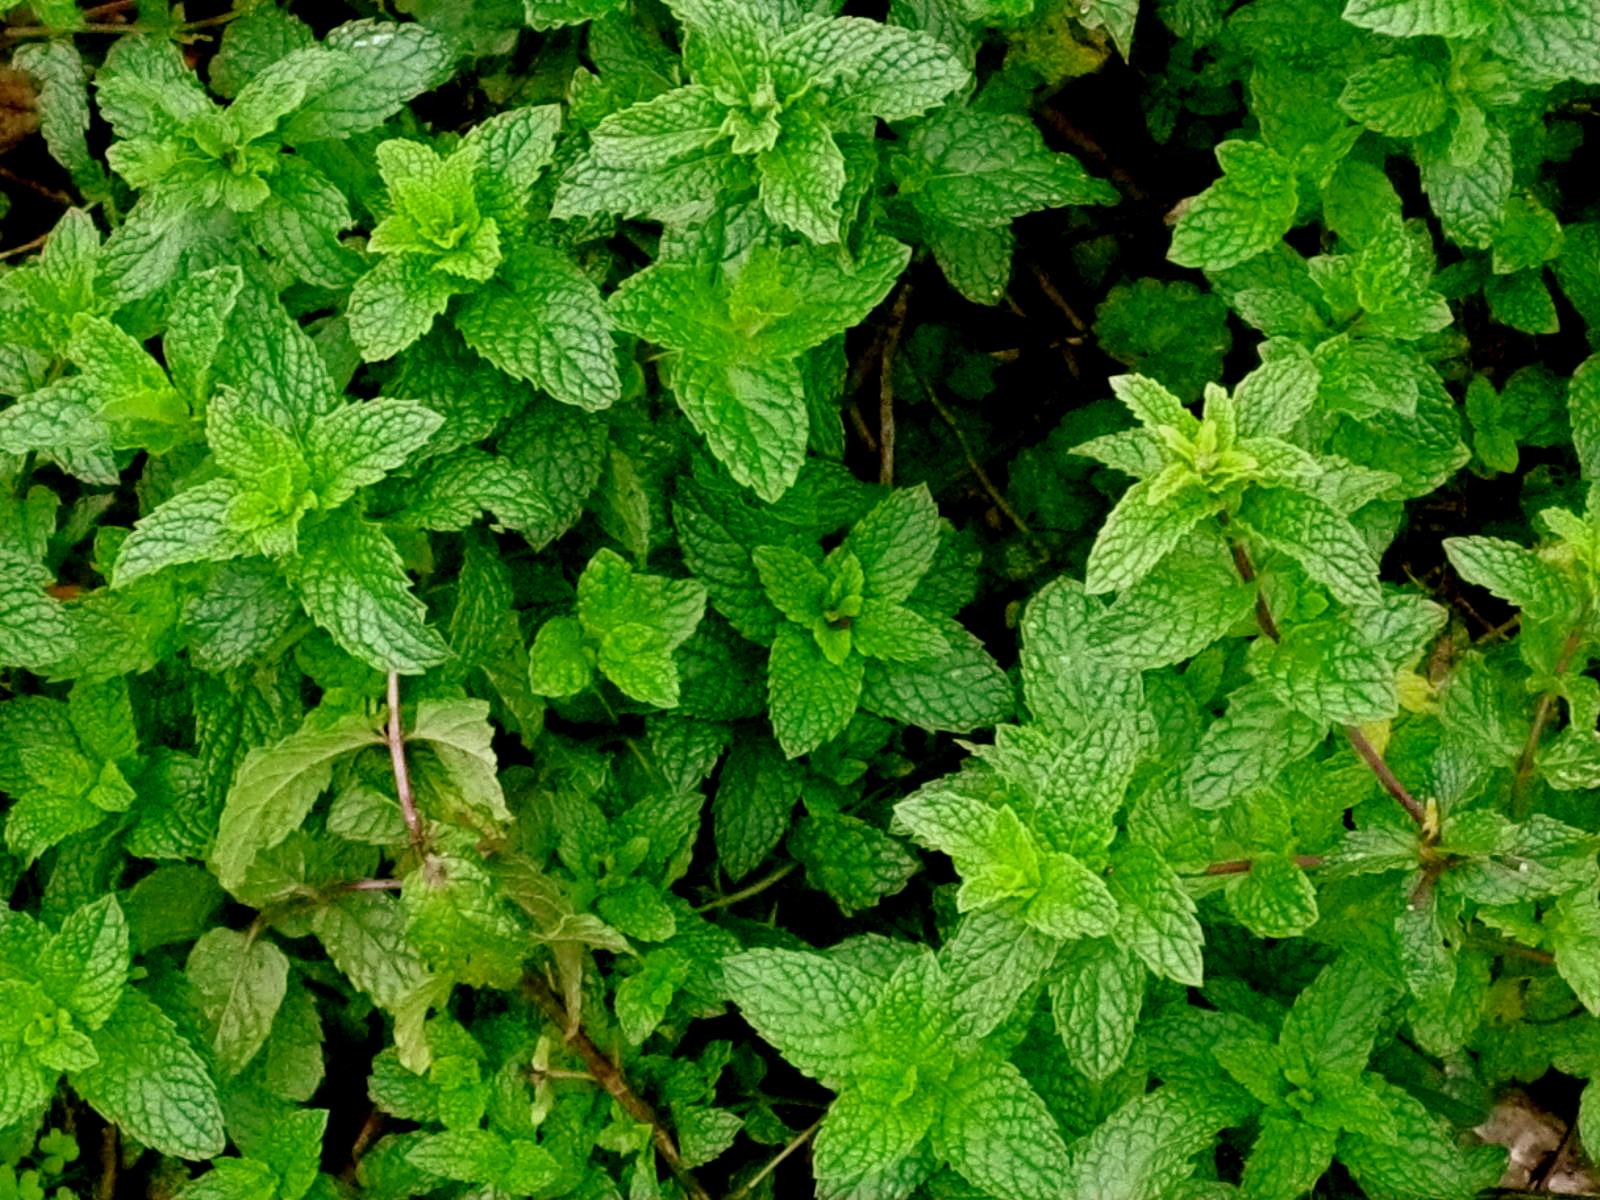 Don’t worry anymore about those pesky bugs, try some of these mosquito repelling plants! You will love having peppermint in your yard! 